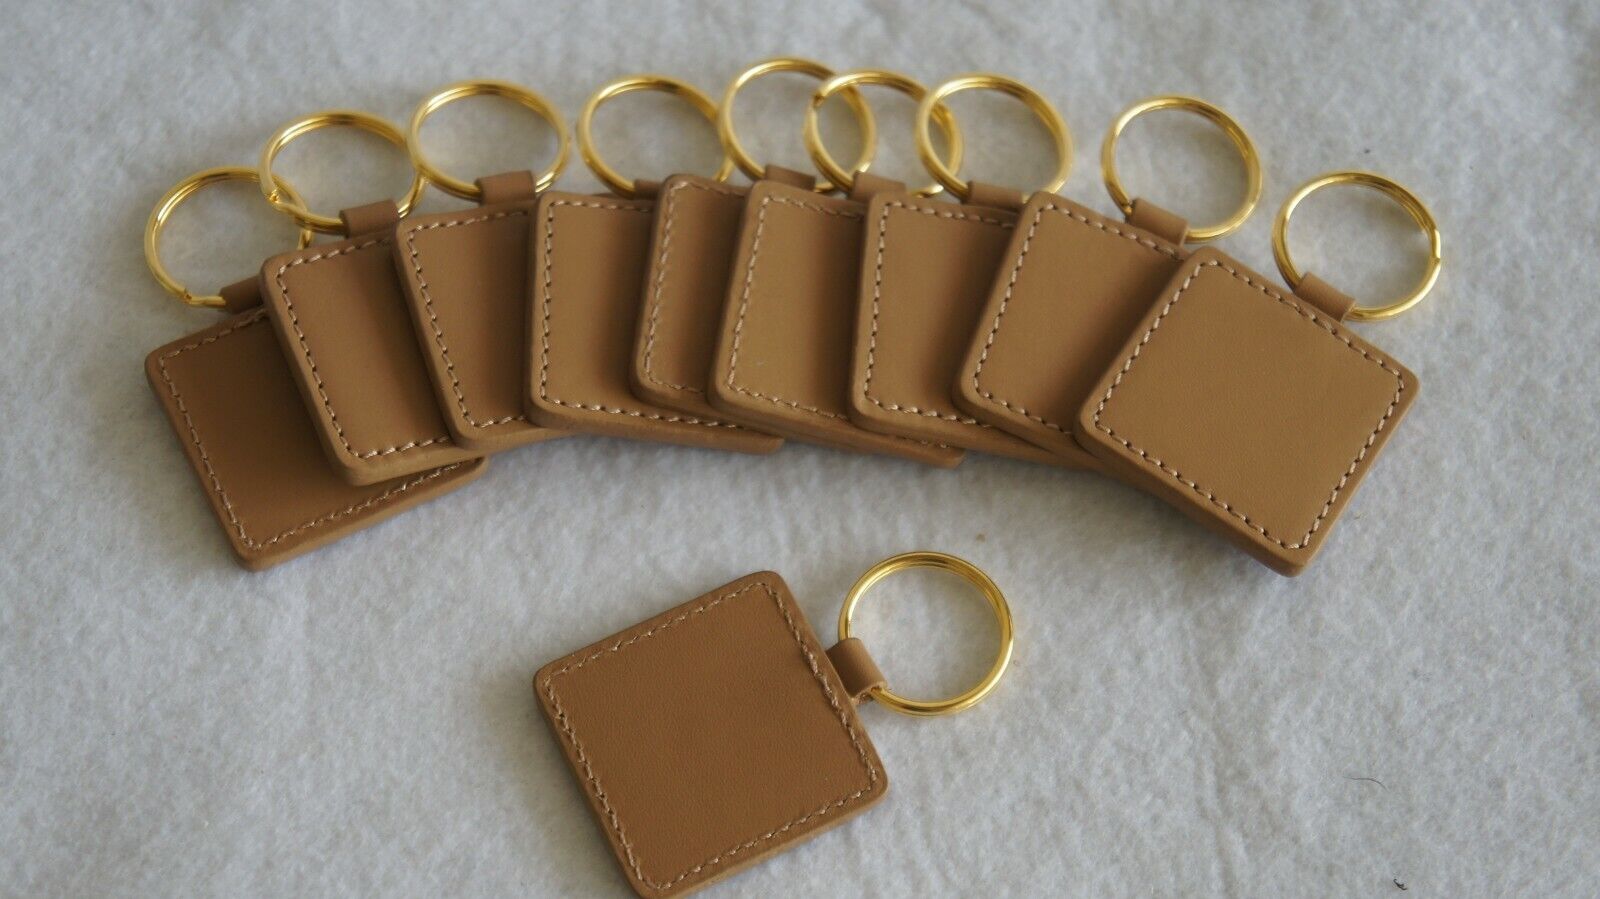 Lot of 10 Genuine Leather Beige Color Square shape Keychain Gold Ring Coach 